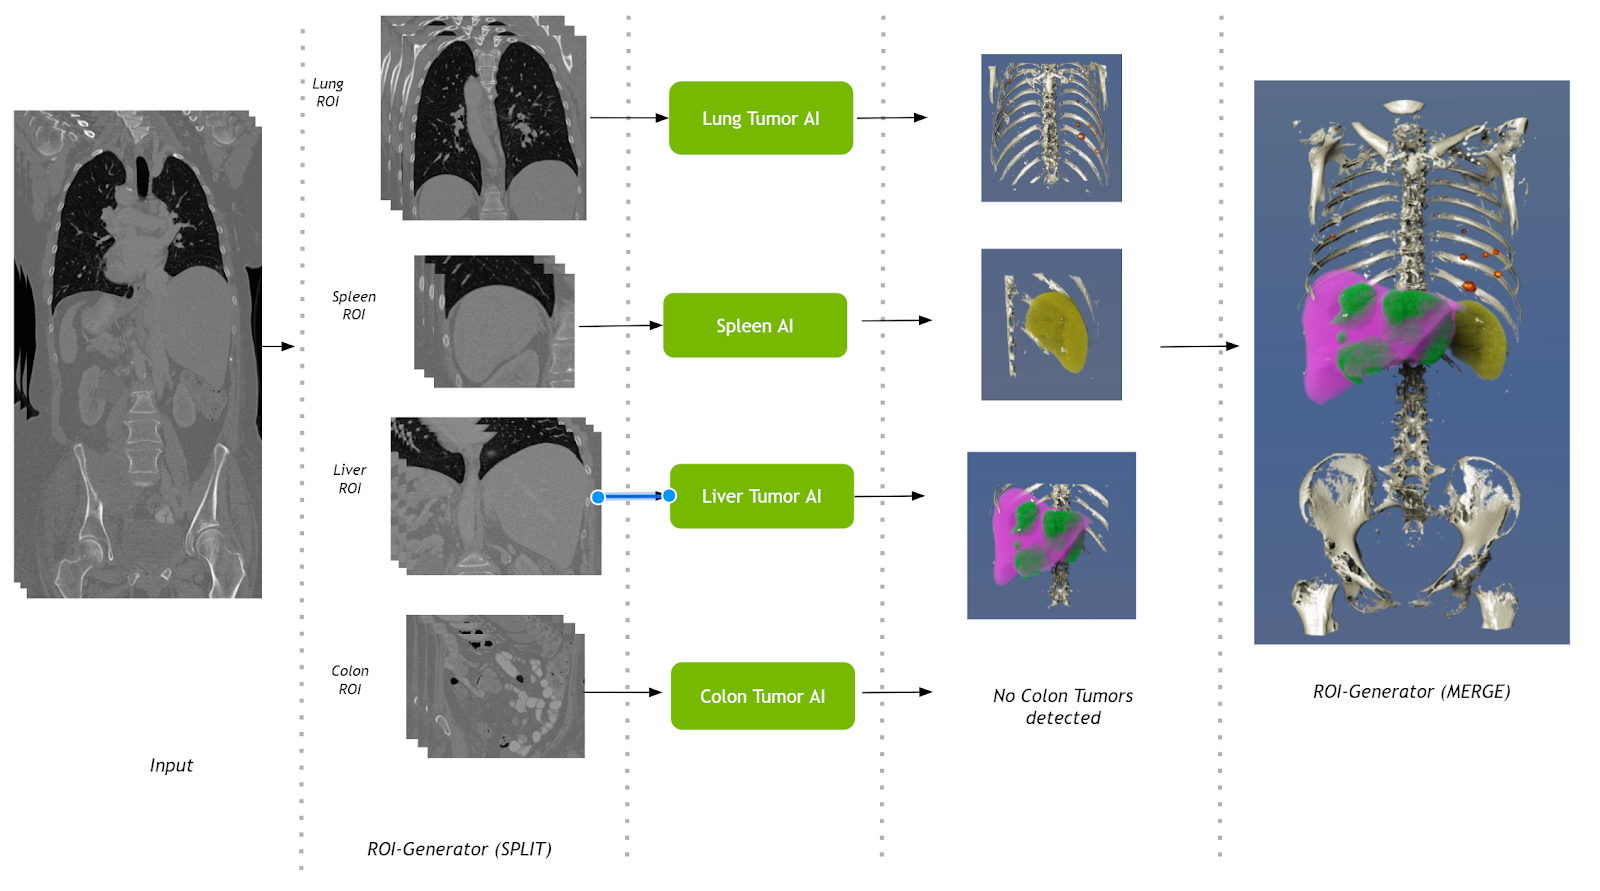 The Multi-organ AI pipeline takes a CT study, runs several organ segmentation algorithms including lung, spleen, liver, and colon, and combines the outputs into a single presentation using Clara Render Server.